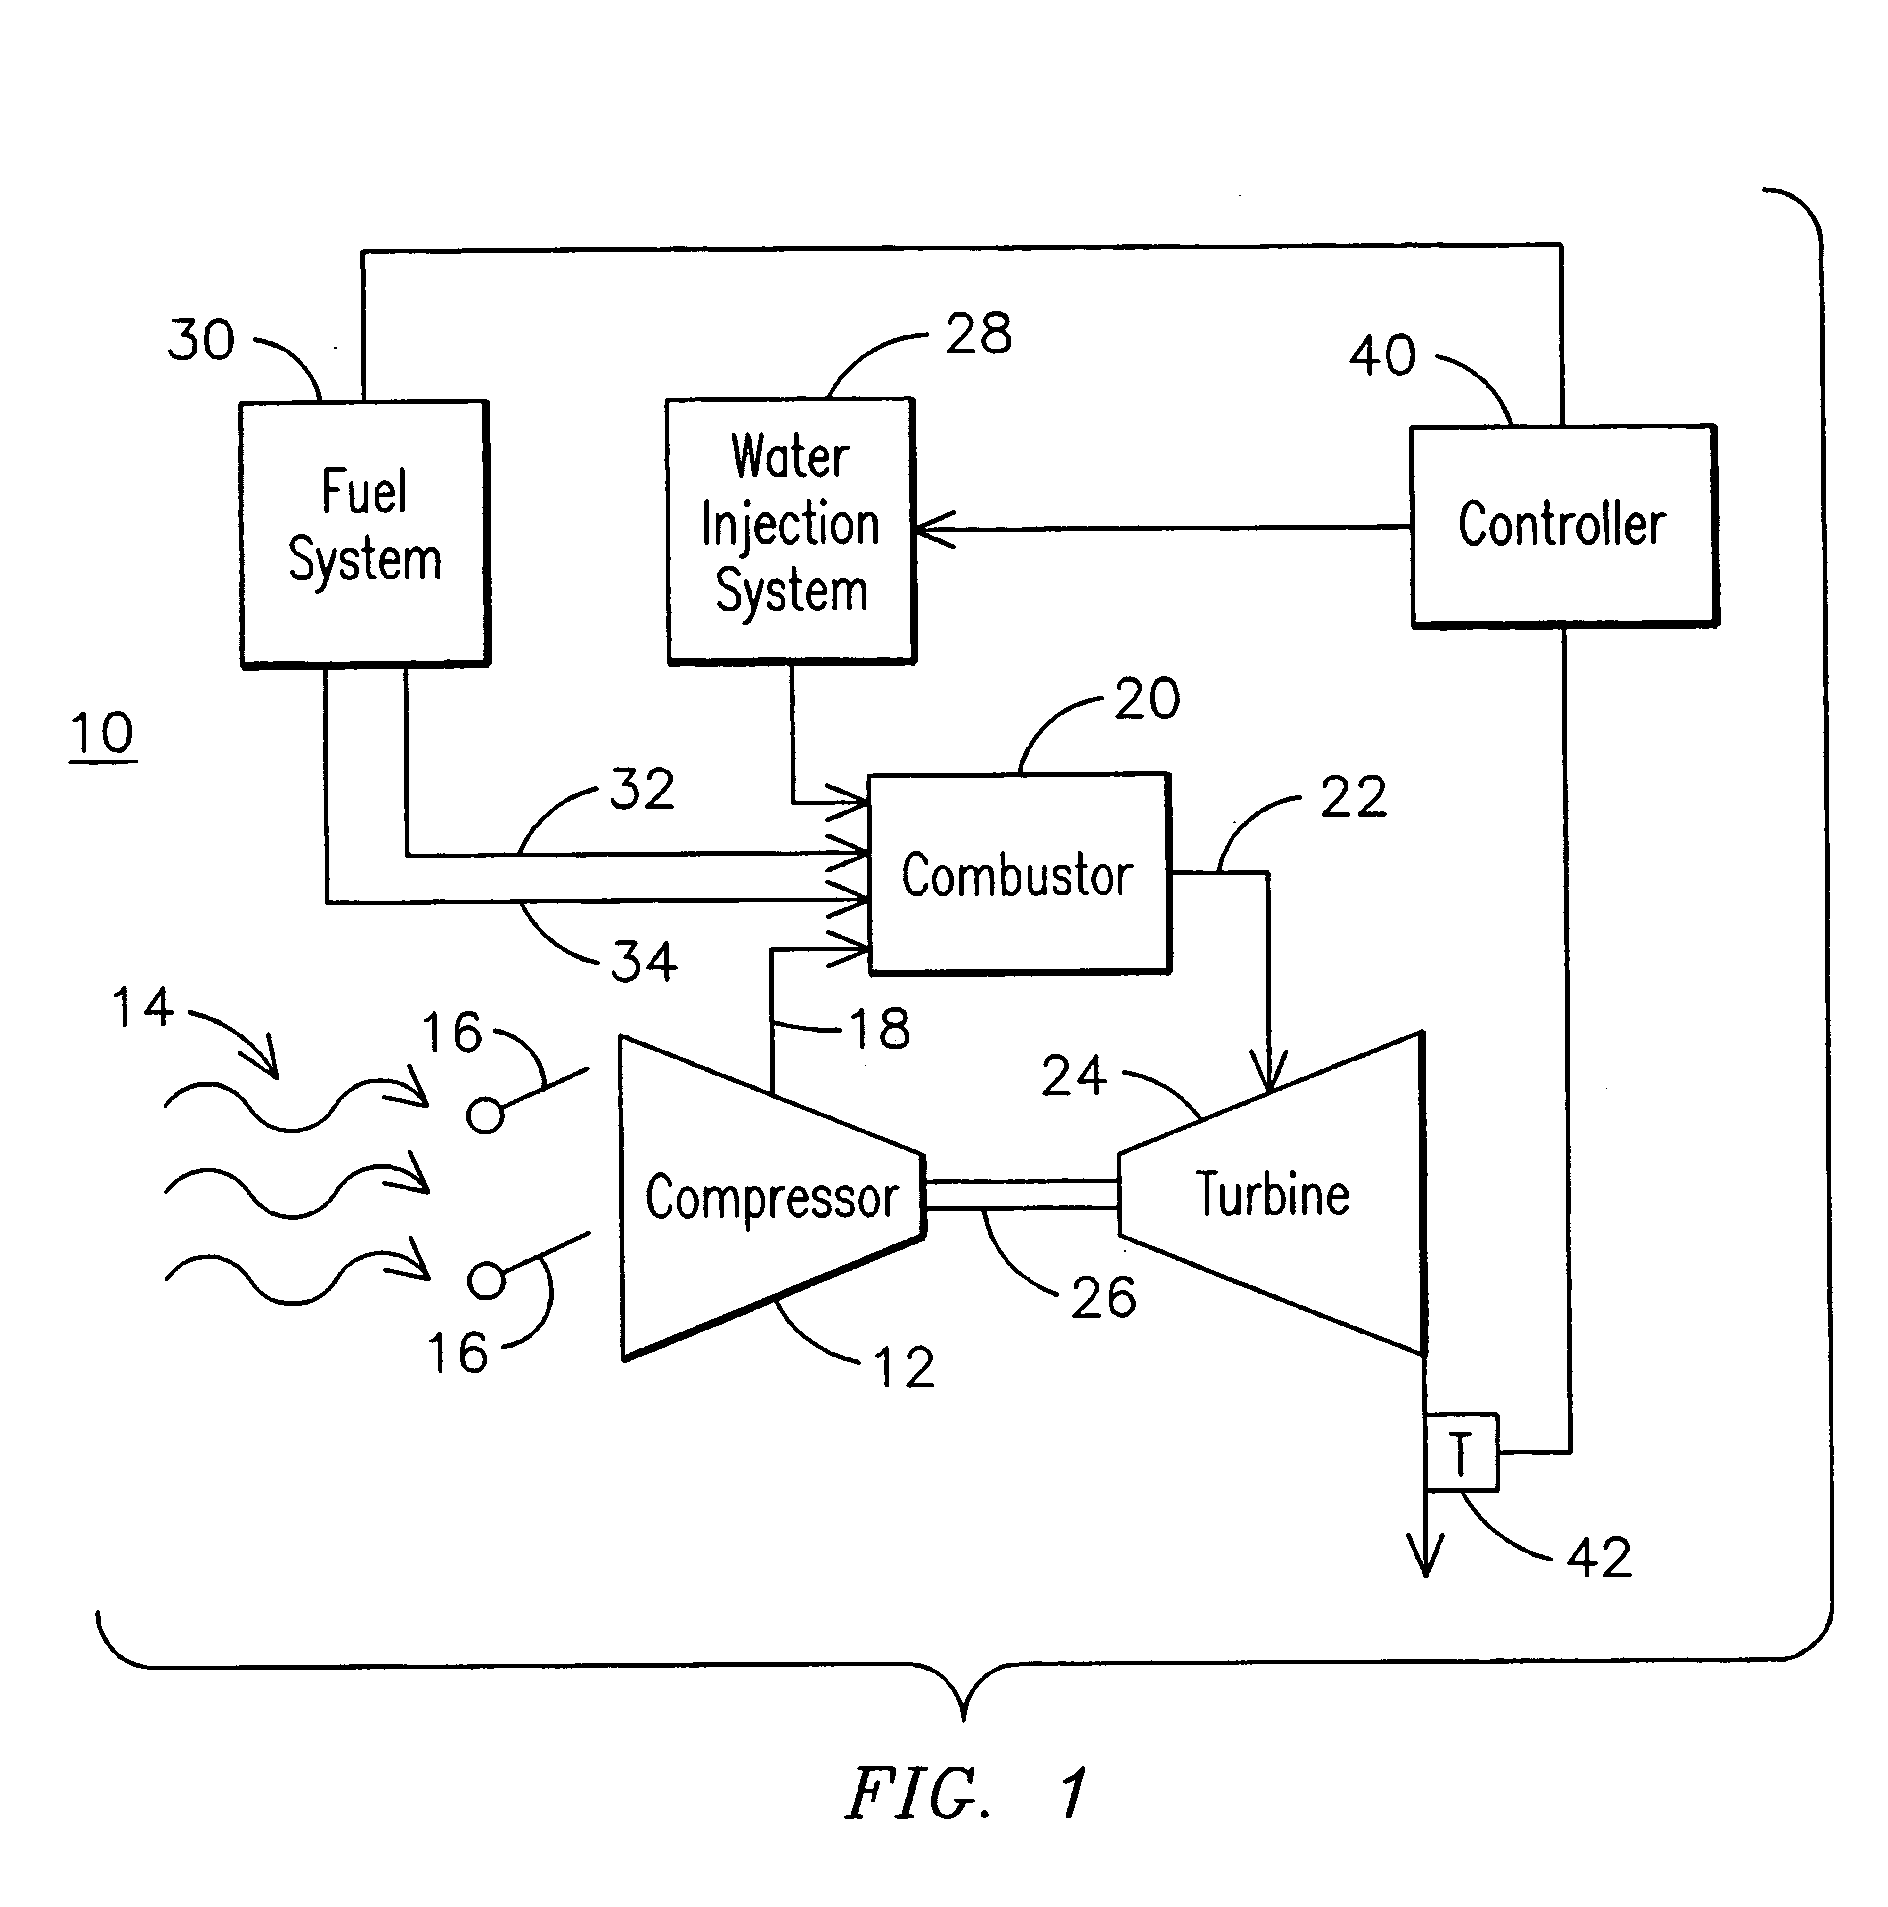 Method of controlling a power generation system